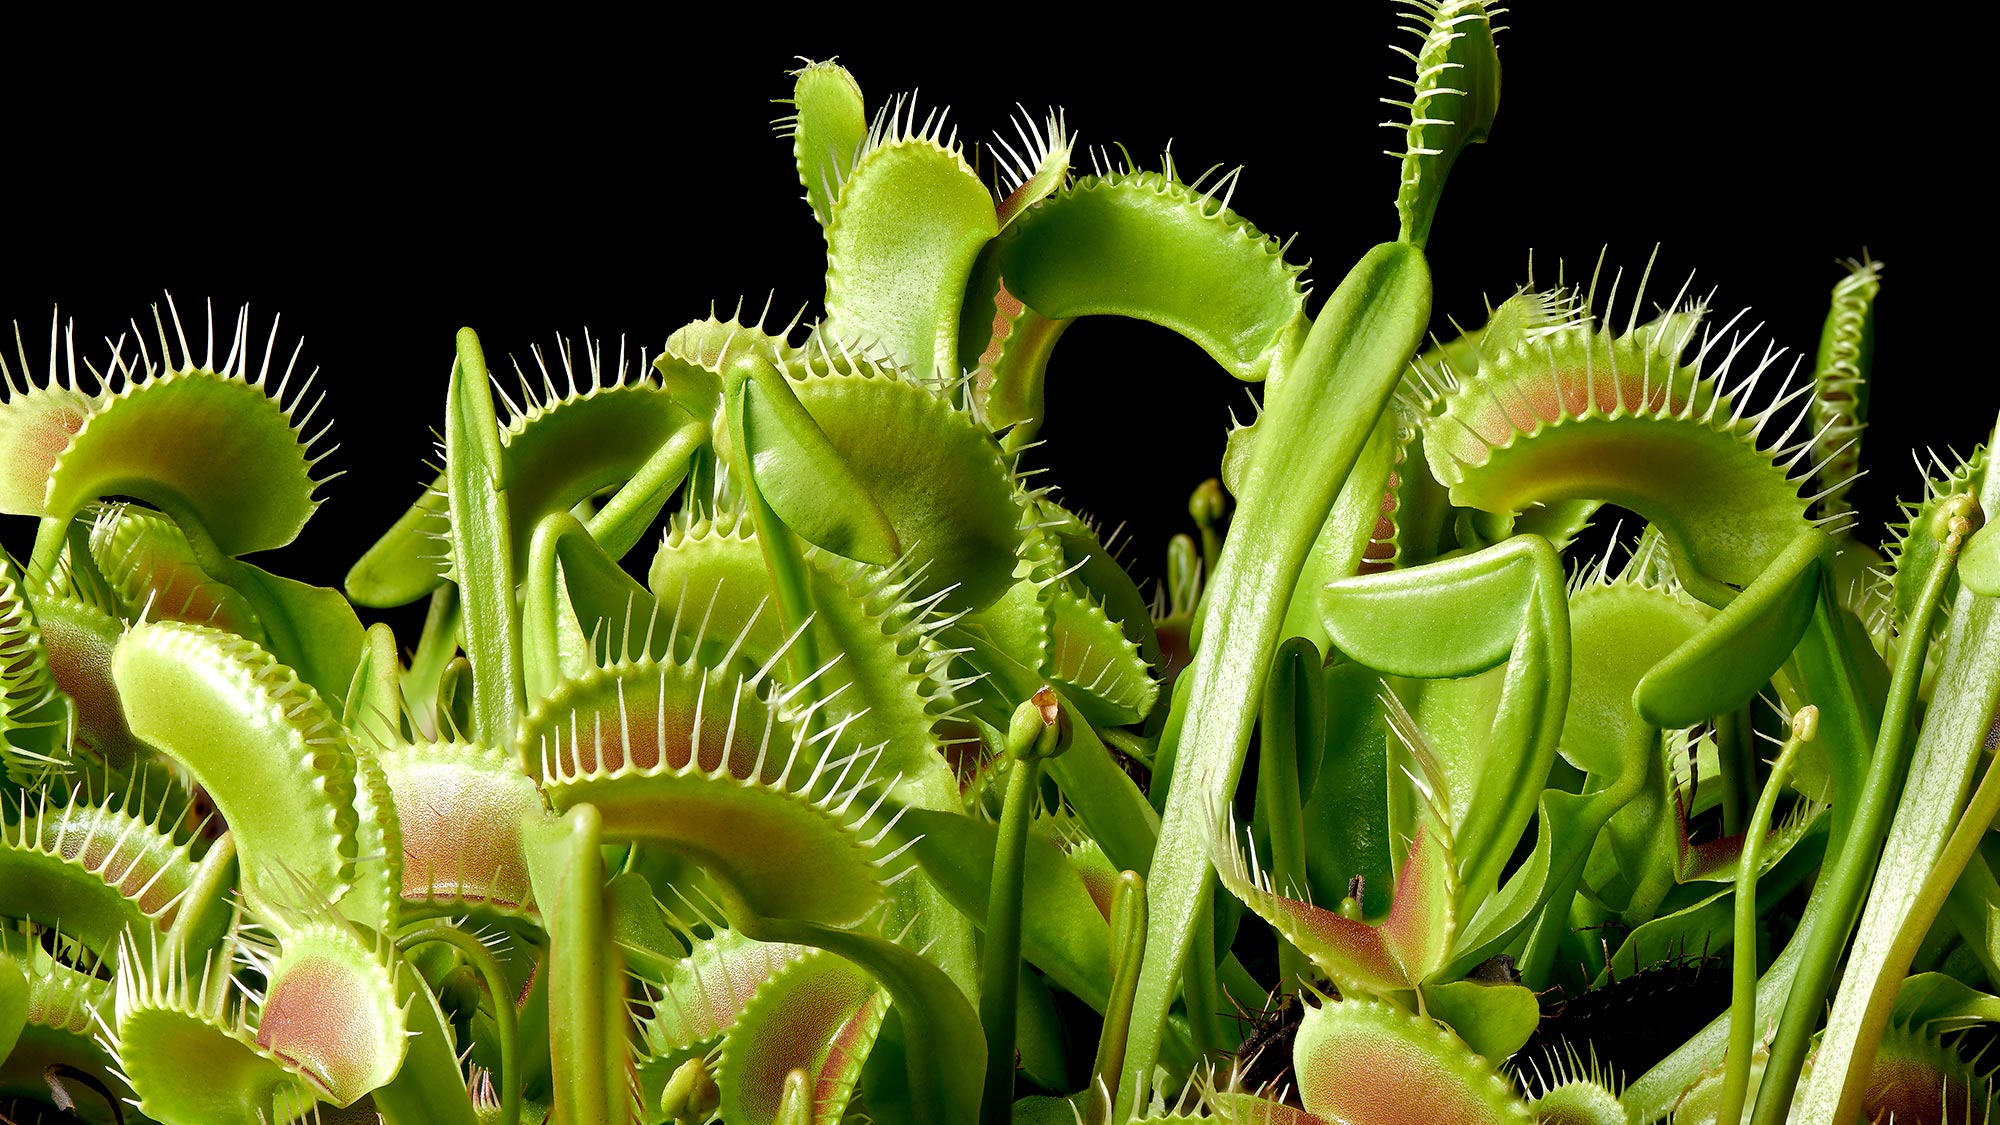 These meat-eating plants are masters of deception